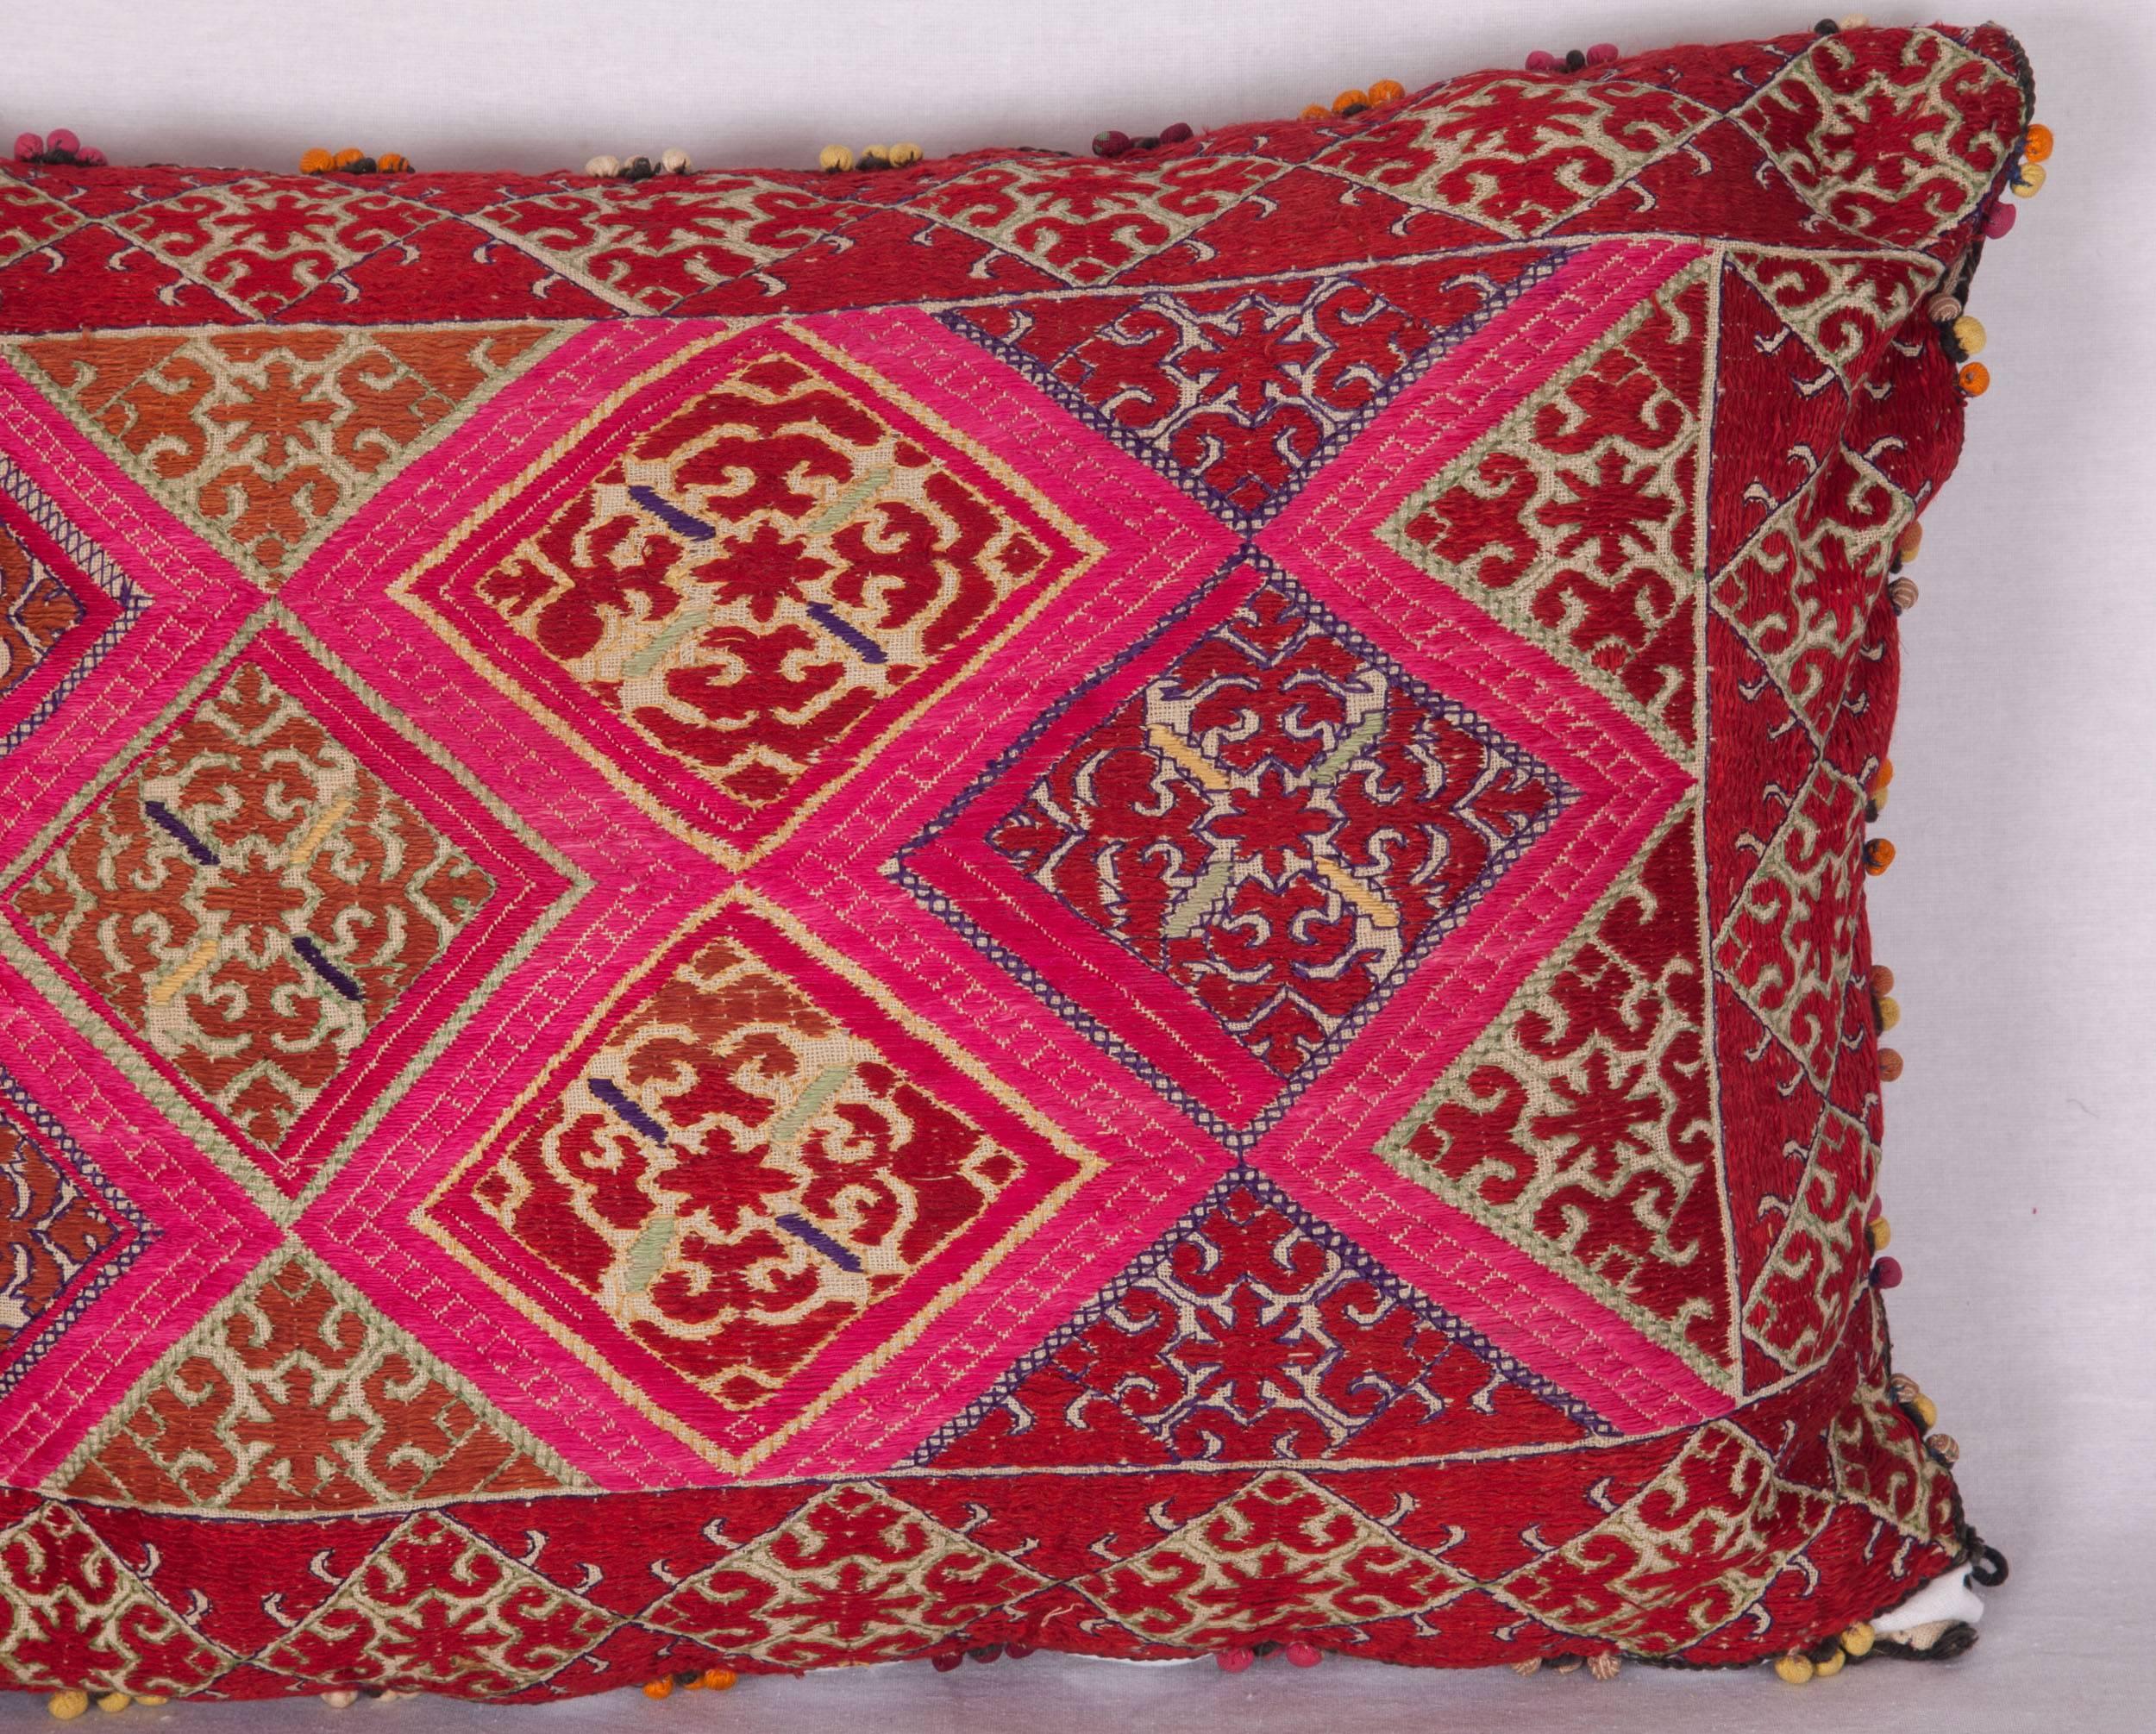 Silk embroidery on cotton fabric from Swat Valley of Pakistan. It does not come with an insert but it comes with a bag made to the size and out of cotton to accommodate the filling. The backing is made of linen. Please note filling is not provided.